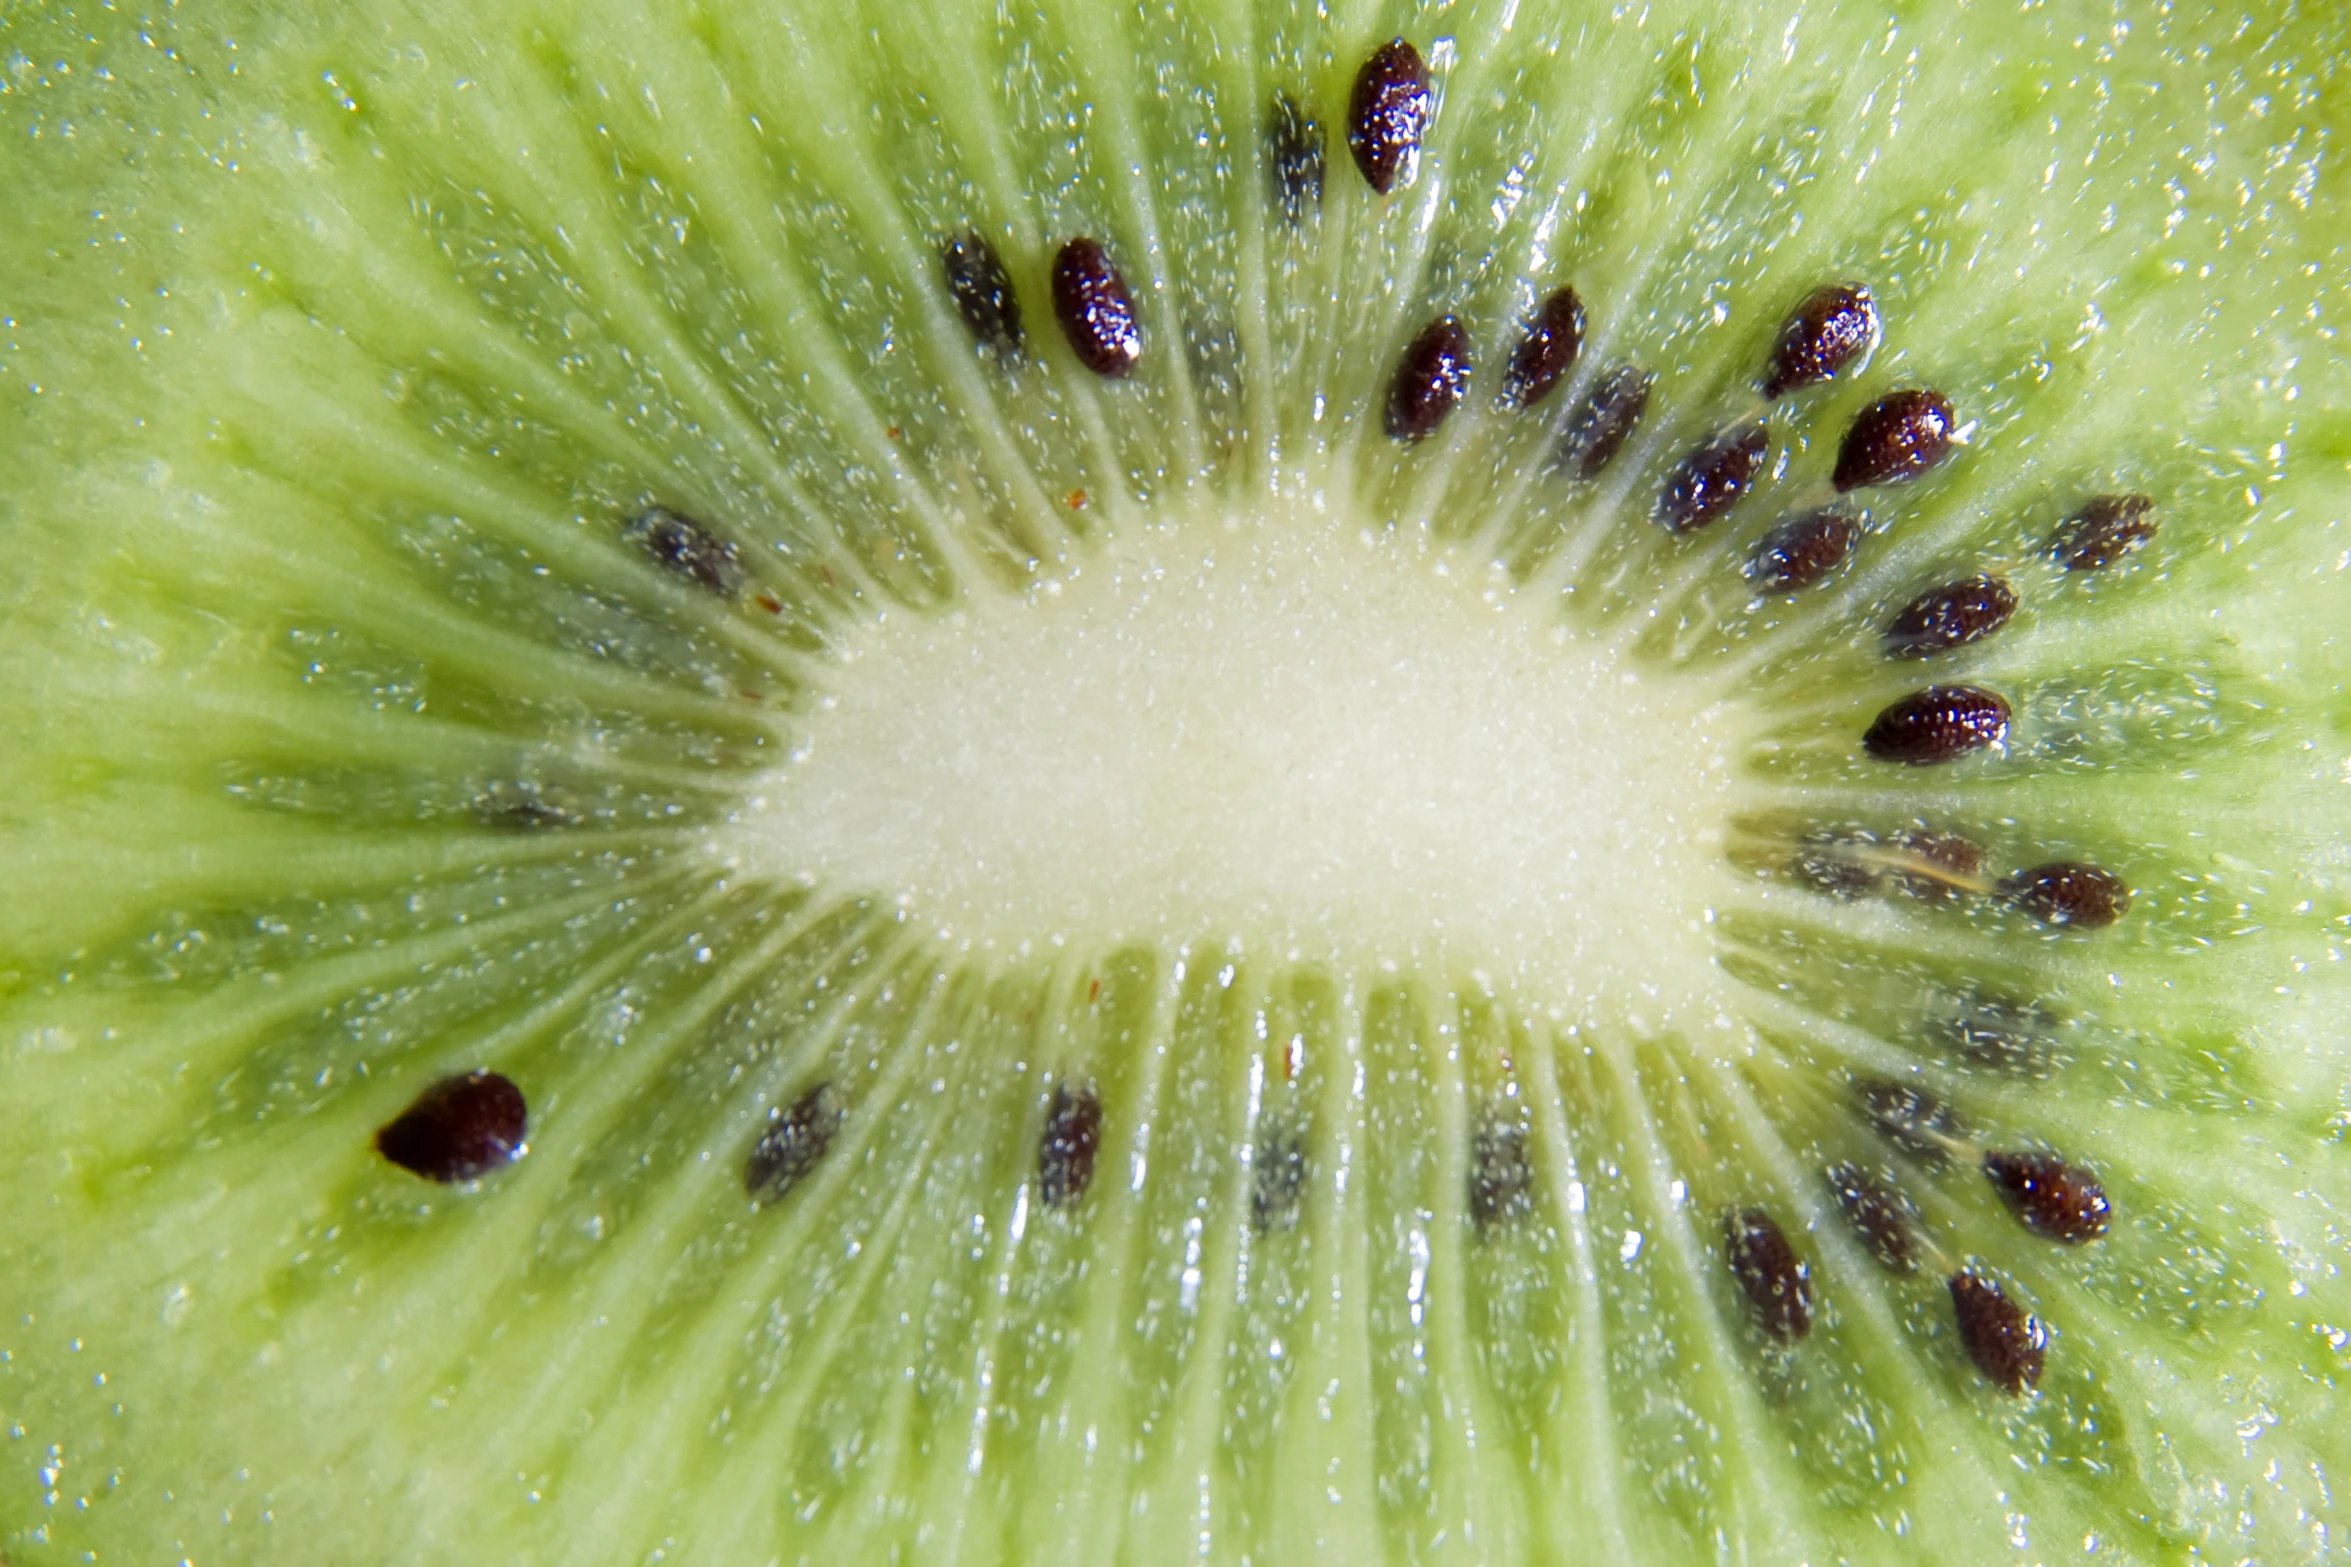 there is an up close view of kiwi fruit